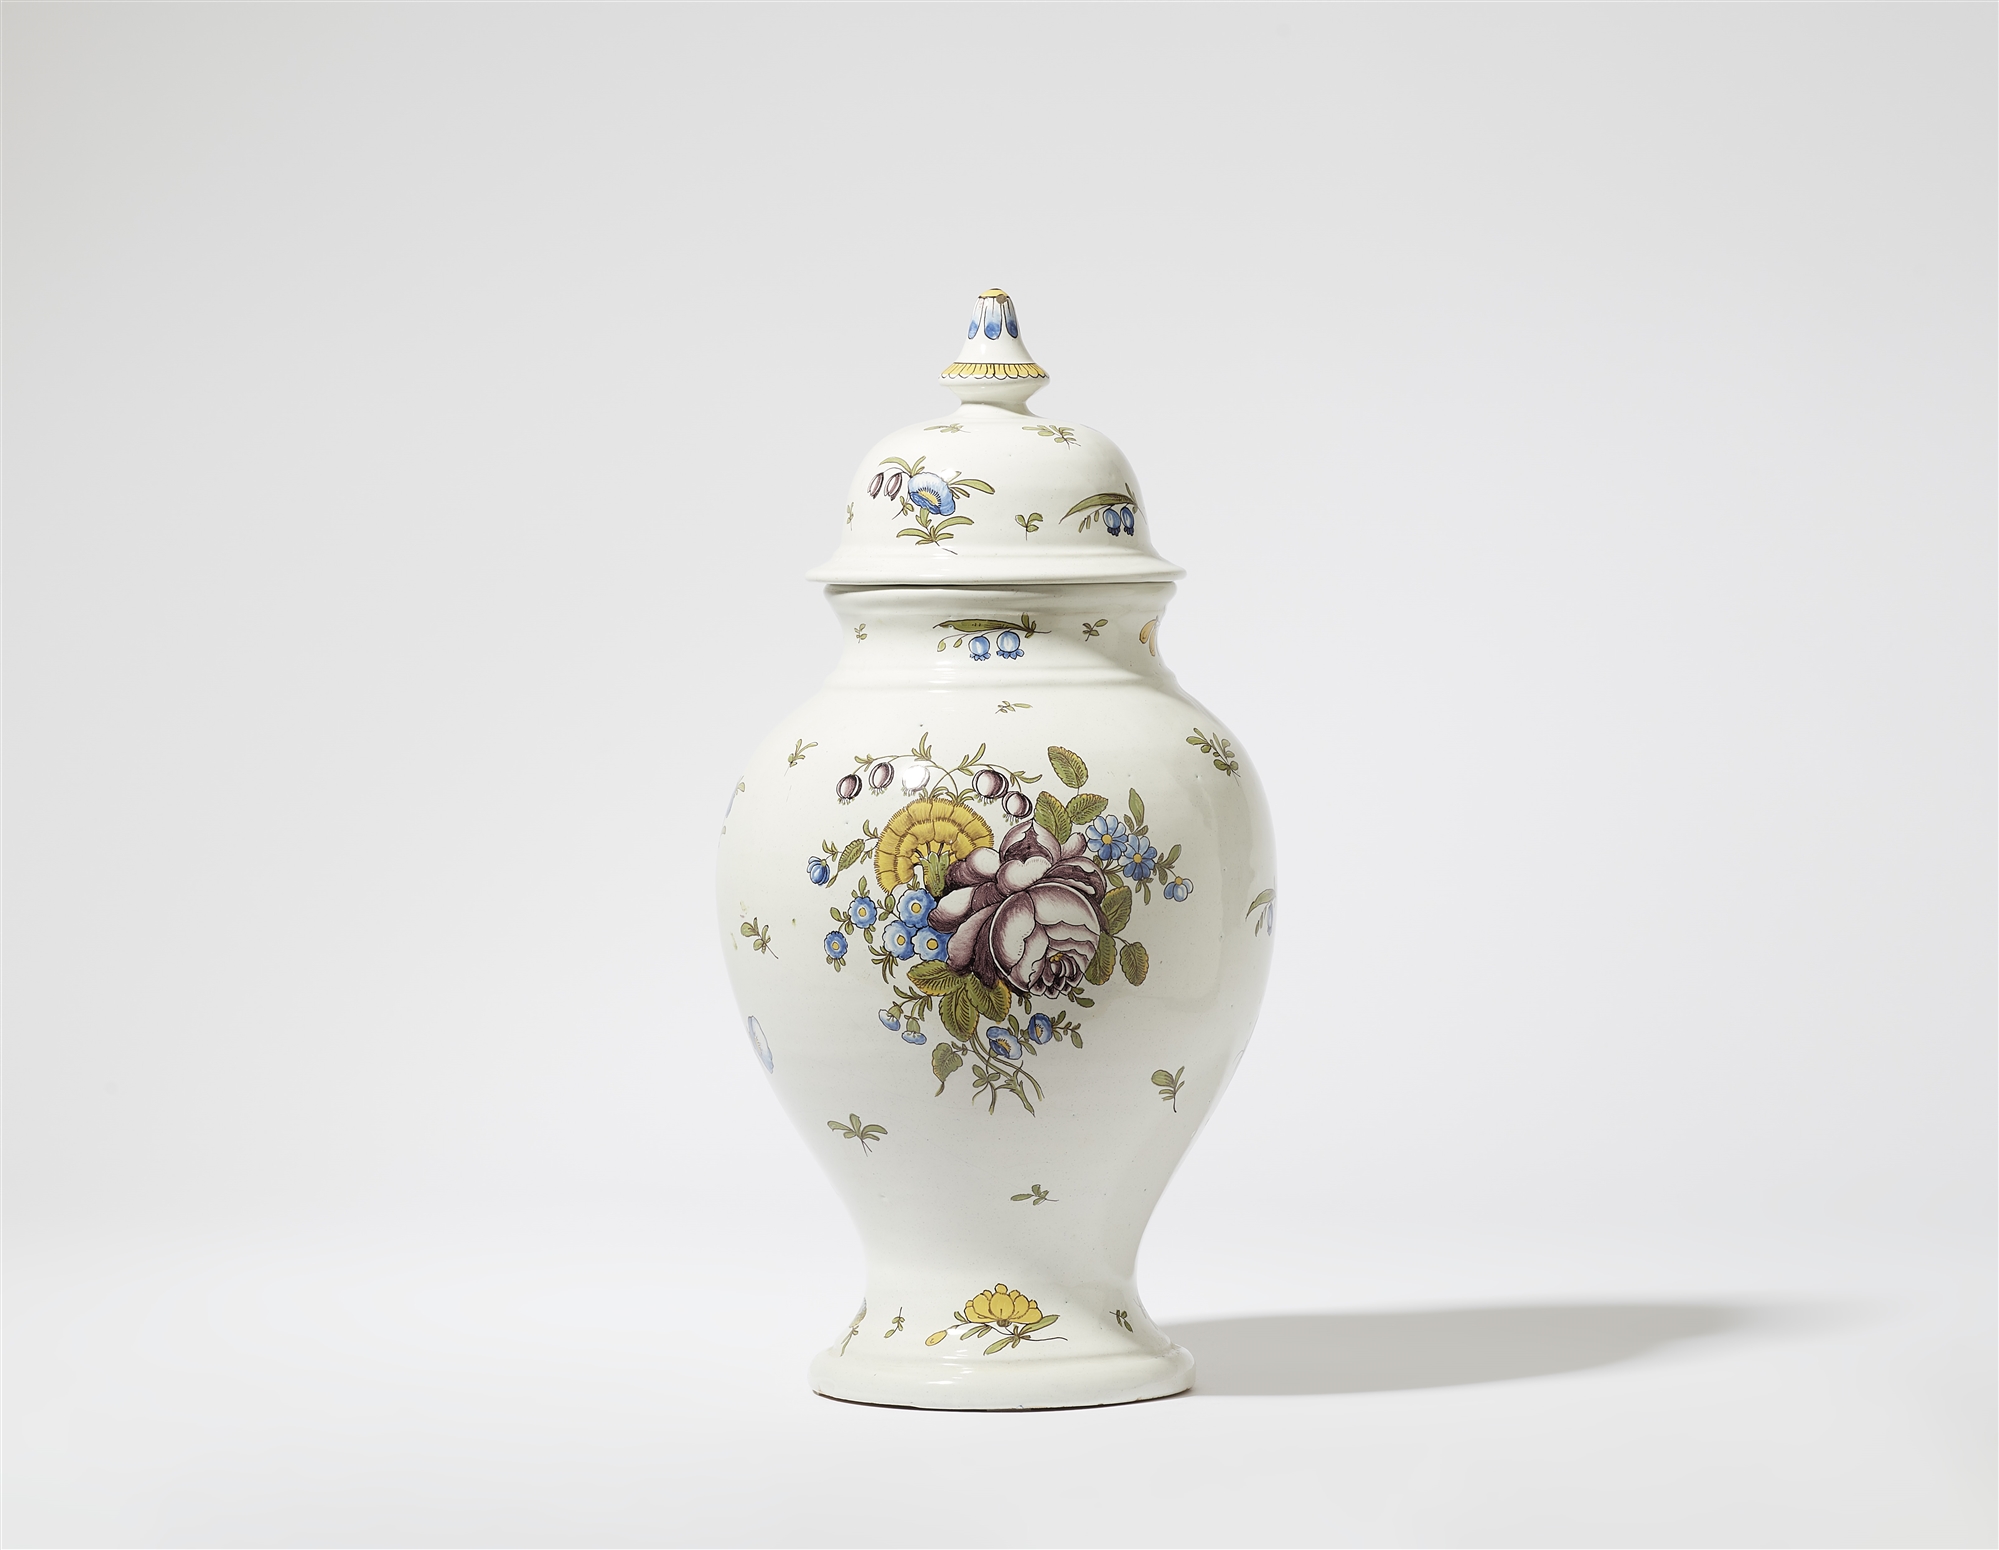 A faience vase with floral decor